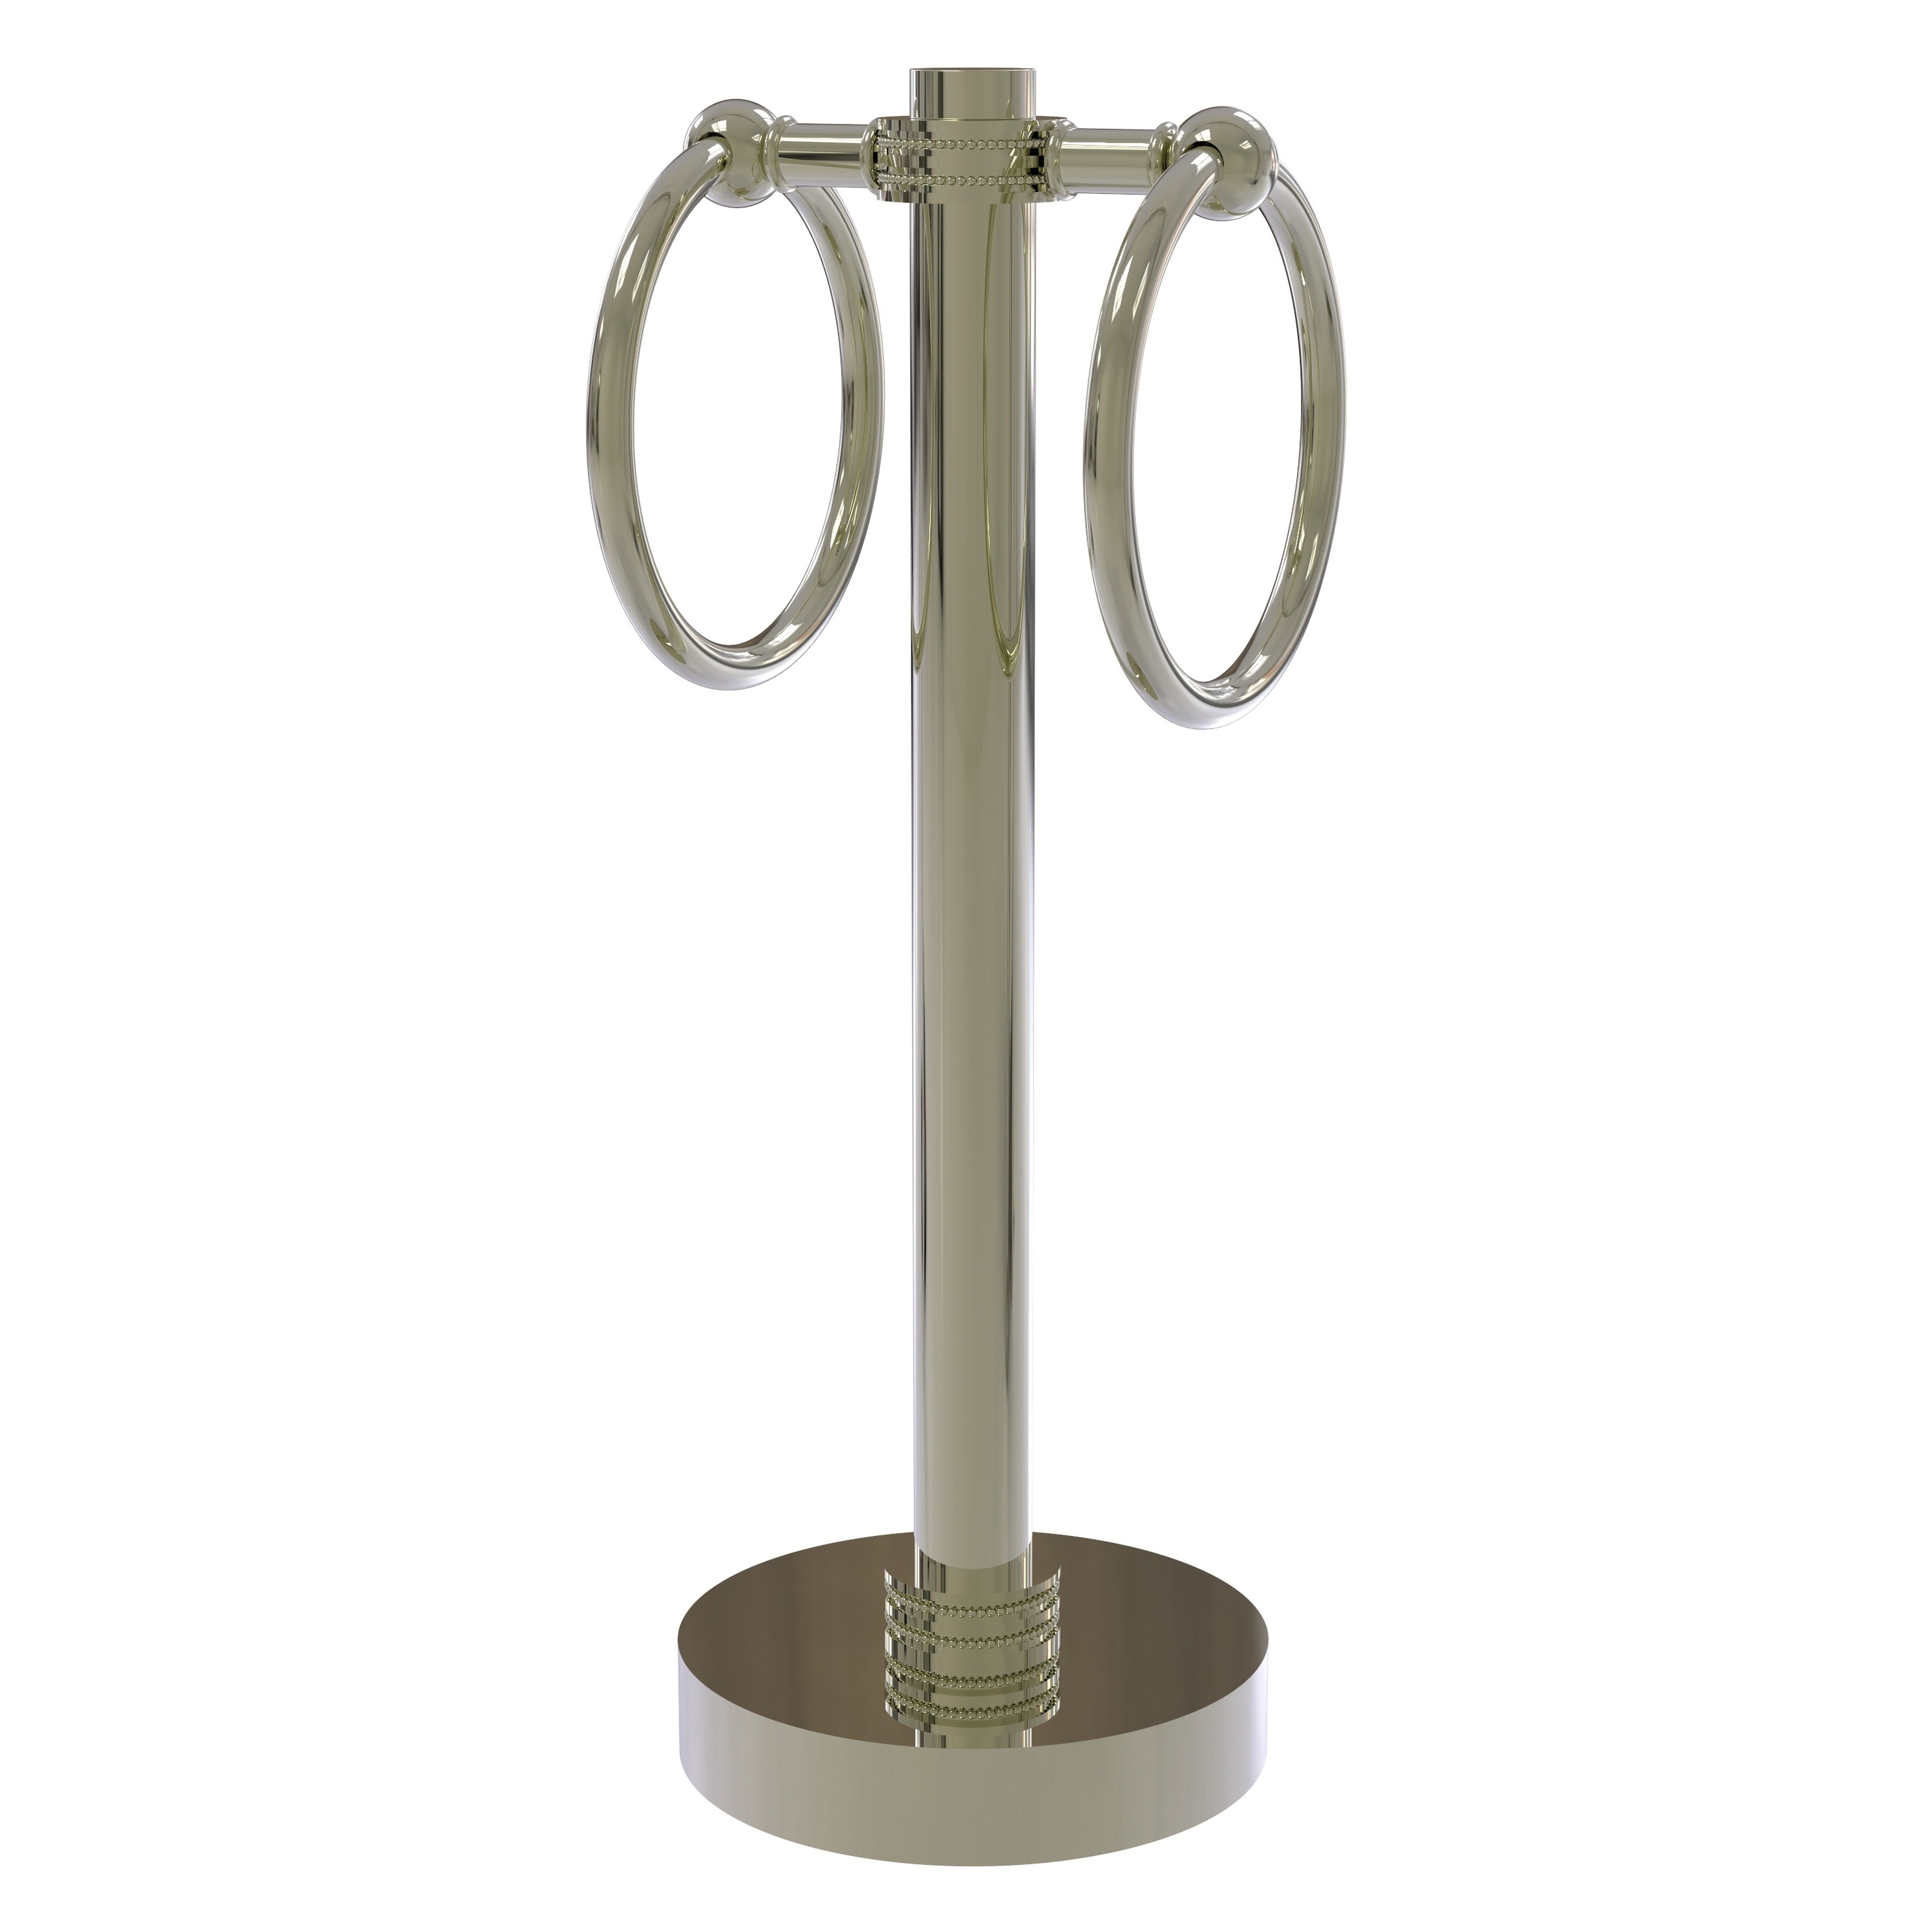 Allied Brass Towel Rings Near Me at Lowes.com